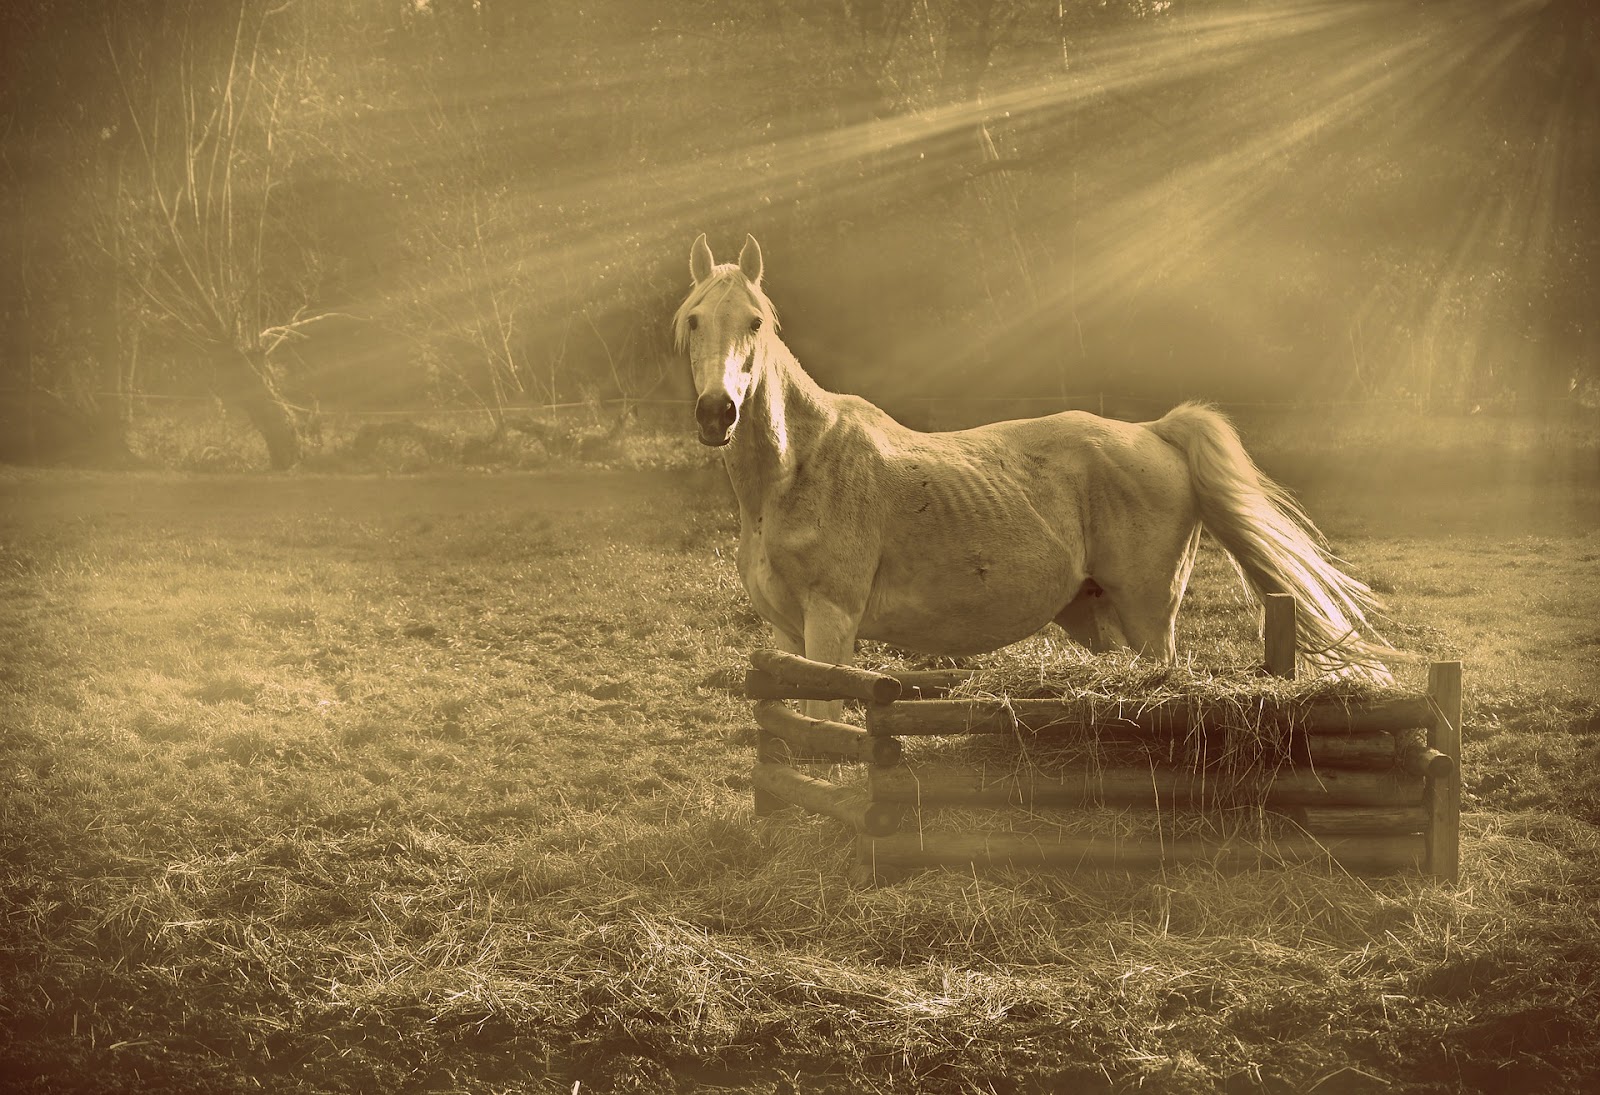 artistic photo of an old grey horse standing in front of a hay manger